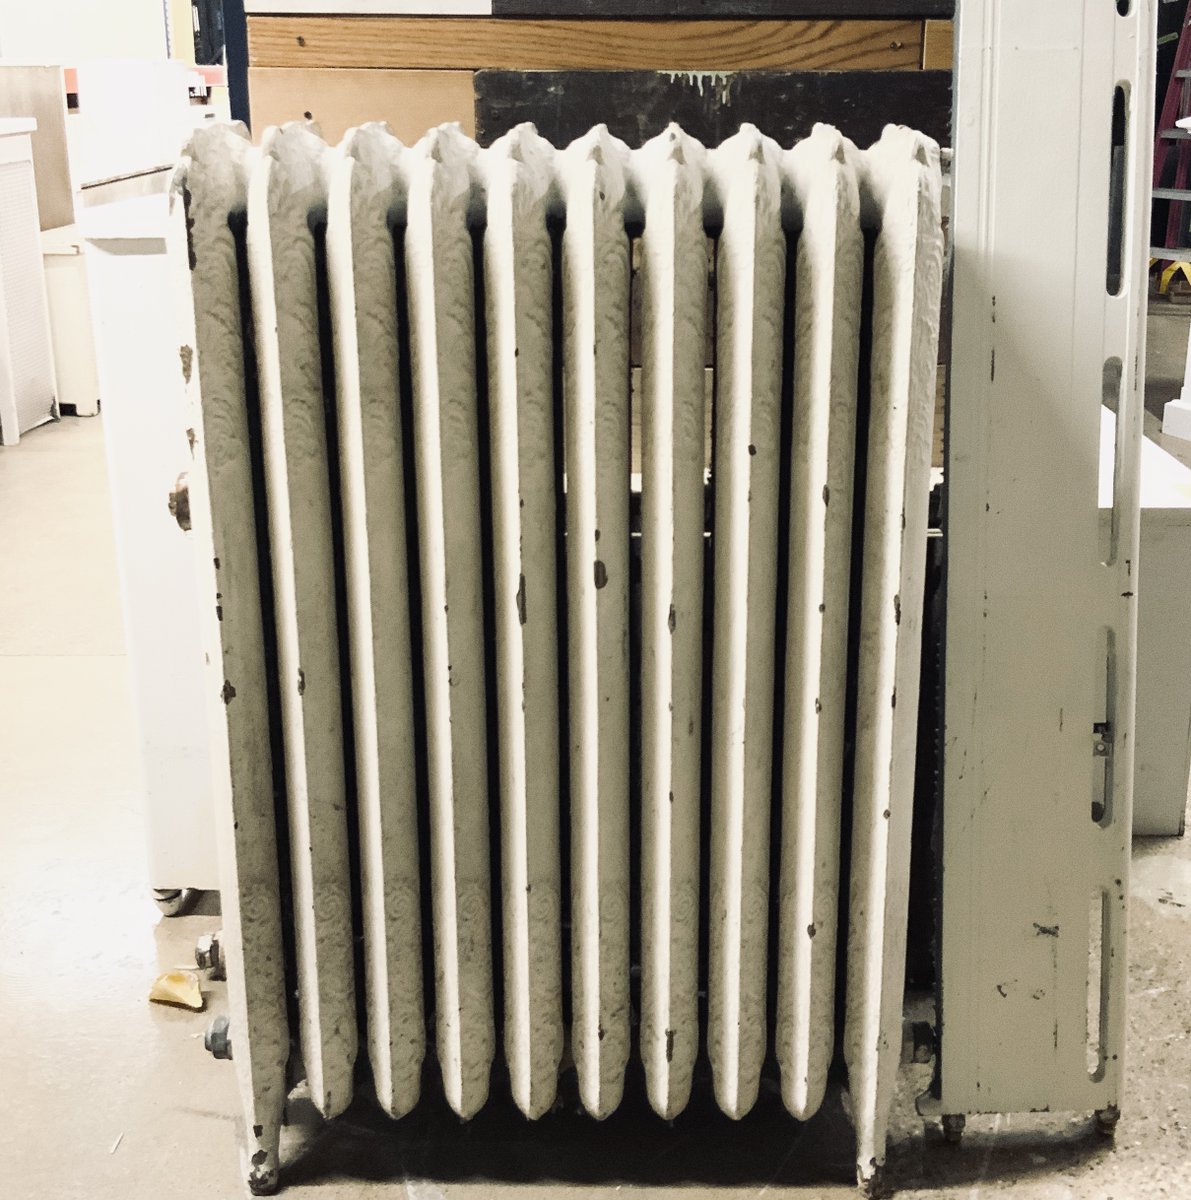 The temperatures are dropping! Luckily we have several radiators and radiator covers for sale to help make your home super toasty!

#chicagolandliving #winteriscoming #vintageradiators #radiator #salvage #salvaged #reclaimed #reuse #buyused #shopsmall #architecturalsalvage